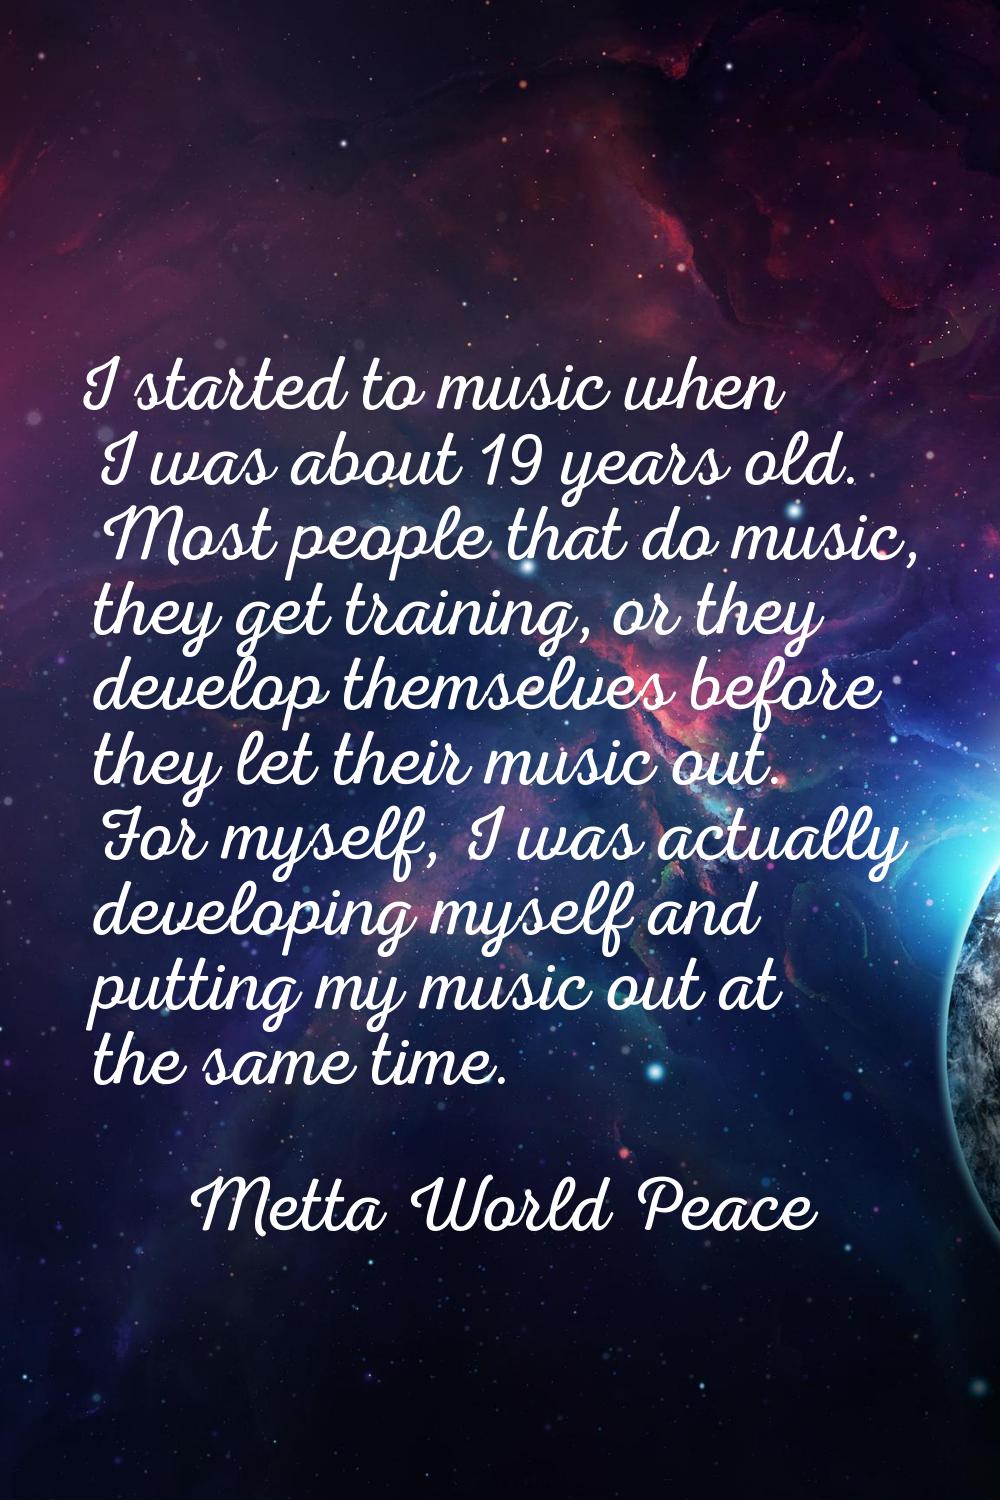 I started to music when I was about 19 years old. Most people that do music, they get training, or 